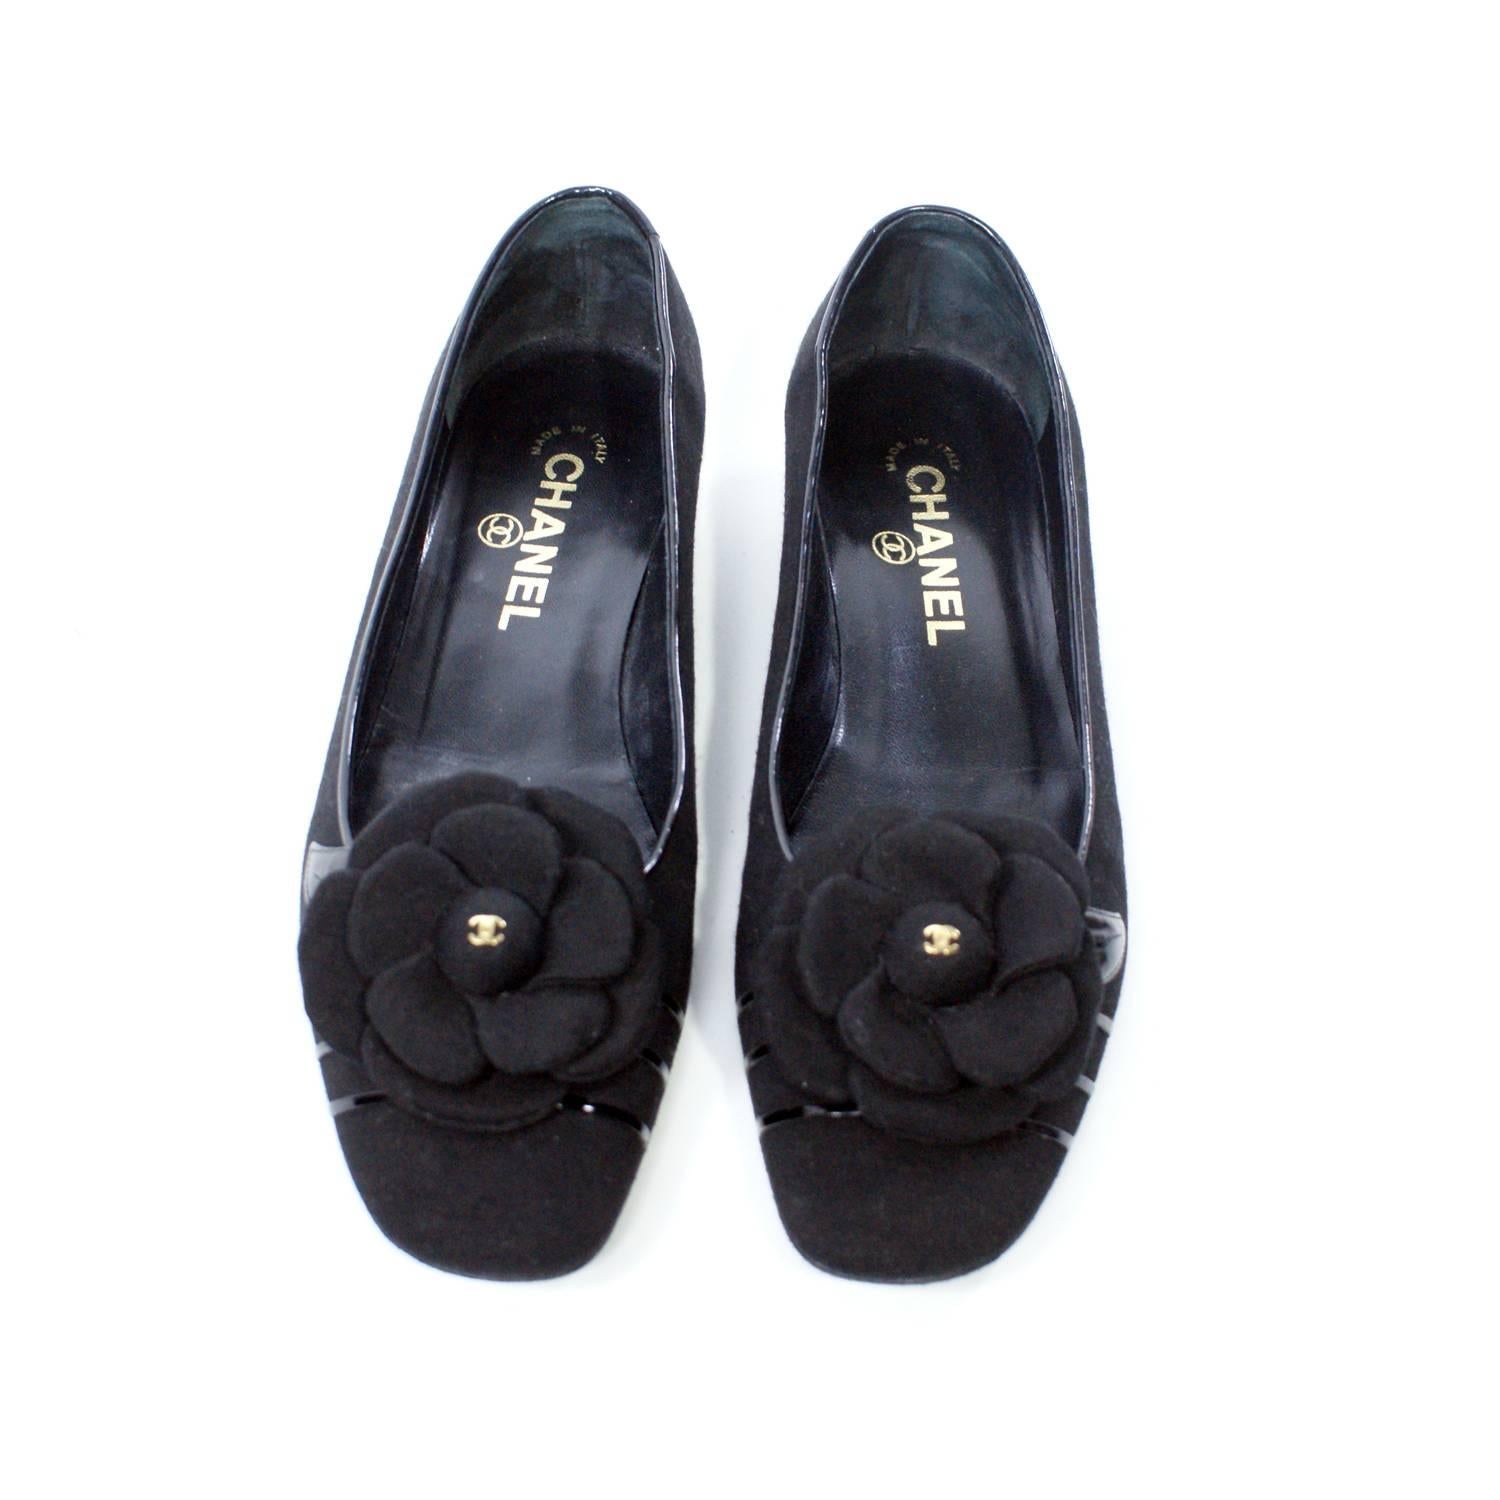 Black Flats with a very low heel 
Floral detail at the toe
Golden Chanel logos
